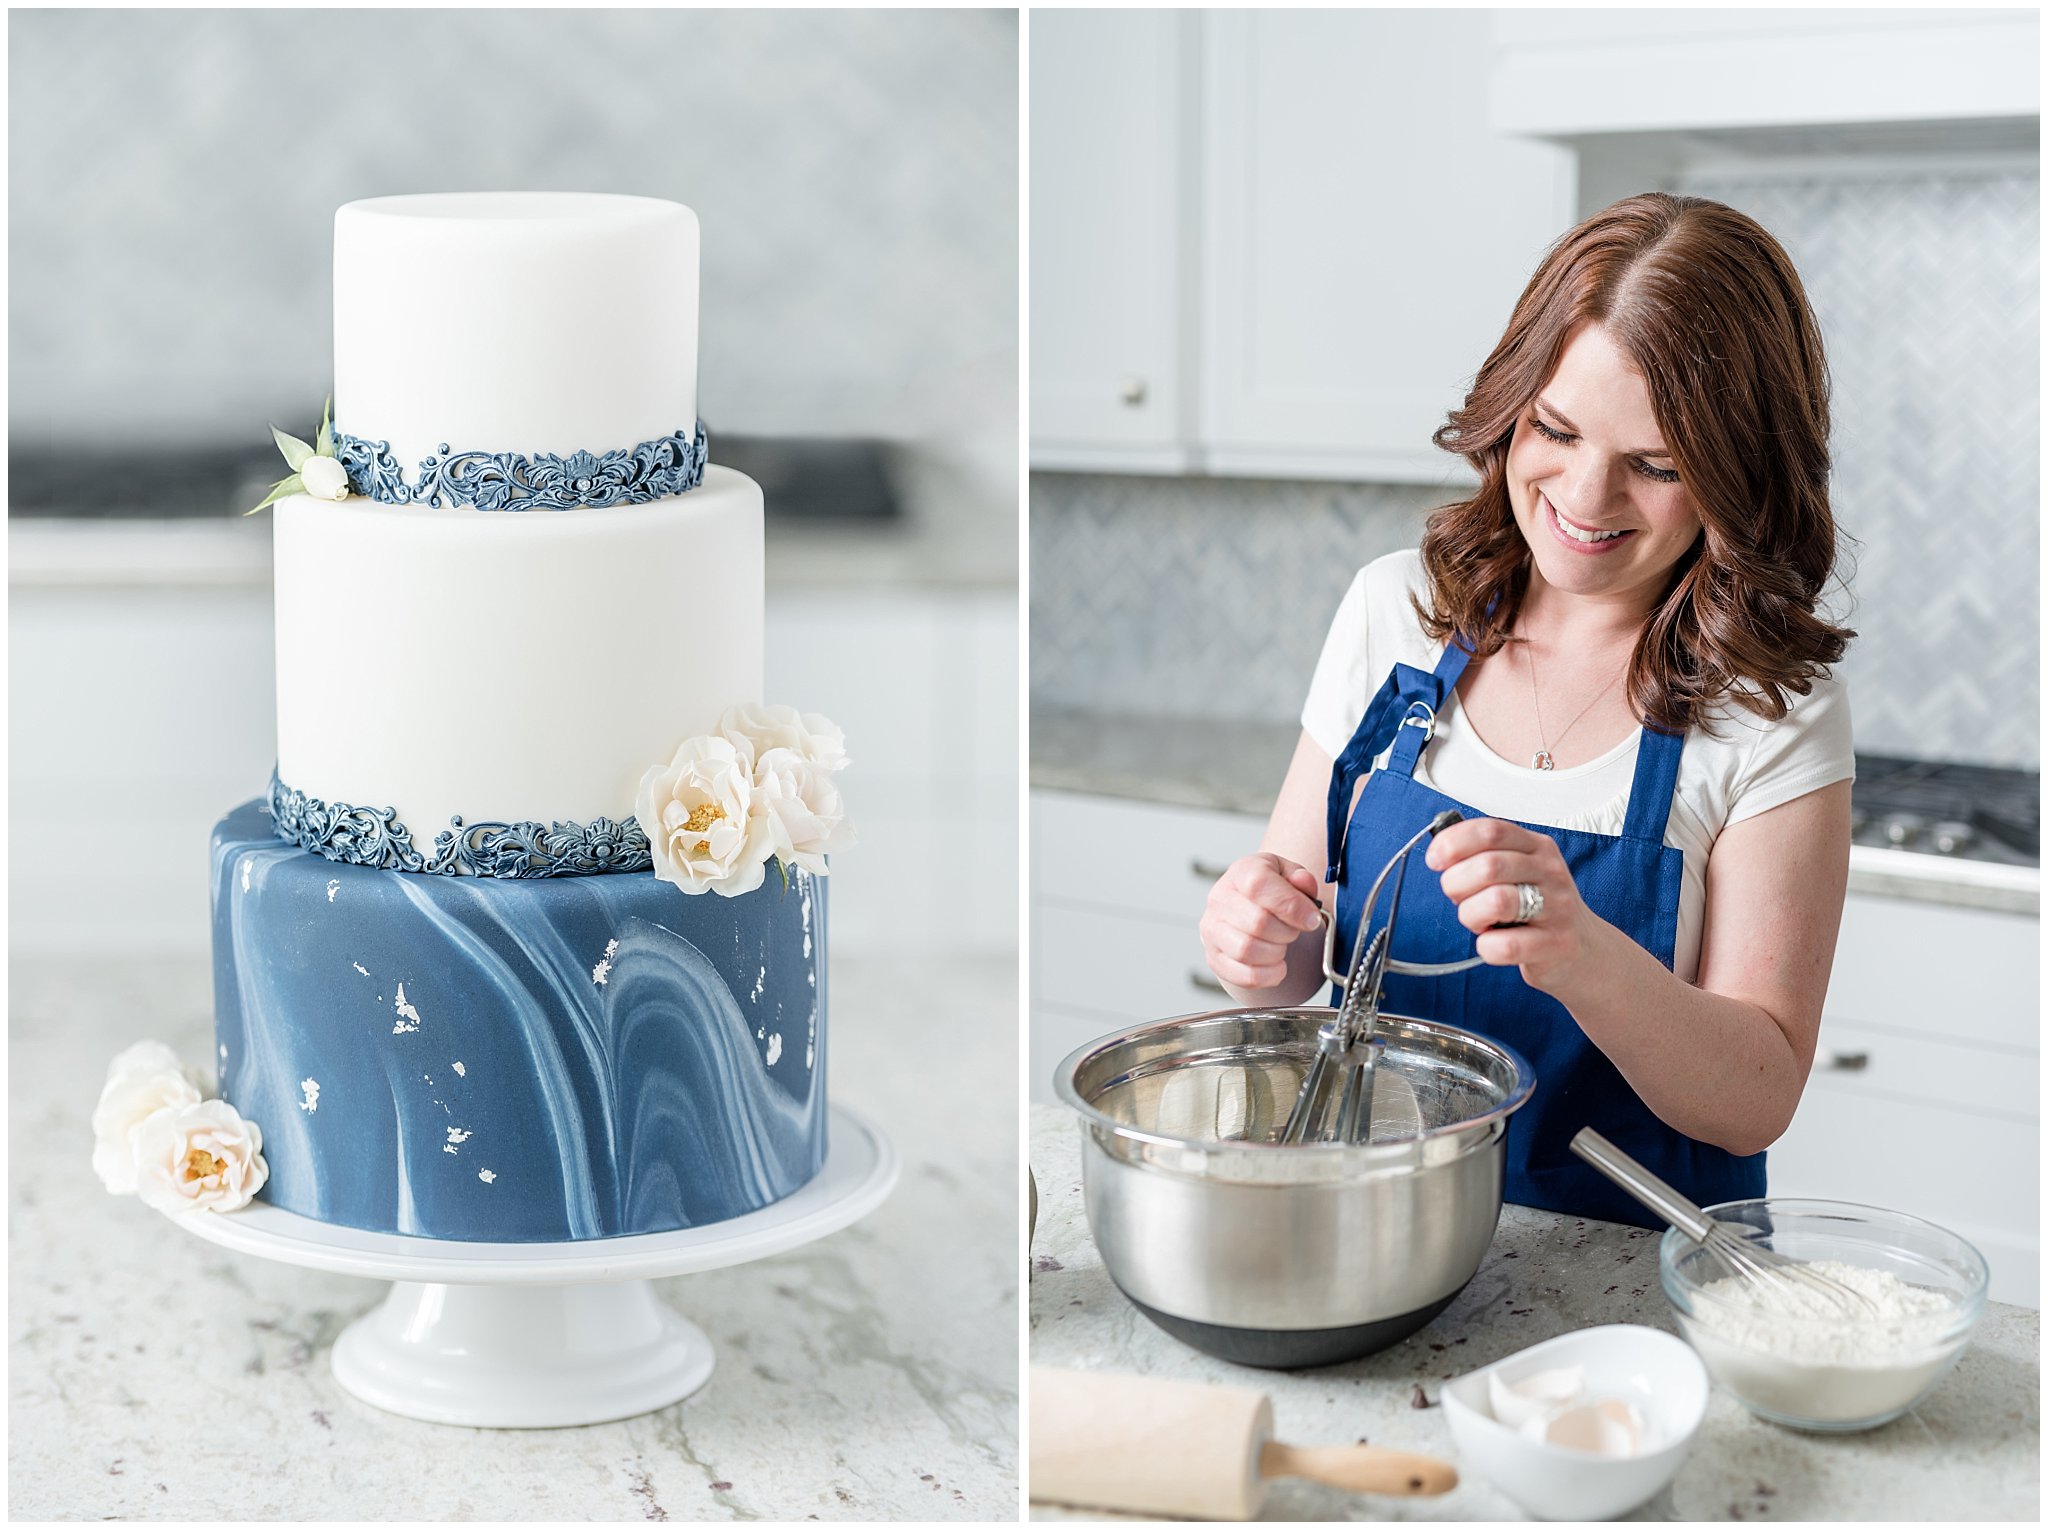 Cake Artist behind the scenes | 5 Tips to Find the Wedding Vendors That Are Right For You | Utah Wedding Photographers | Jessie and Dallin Photography